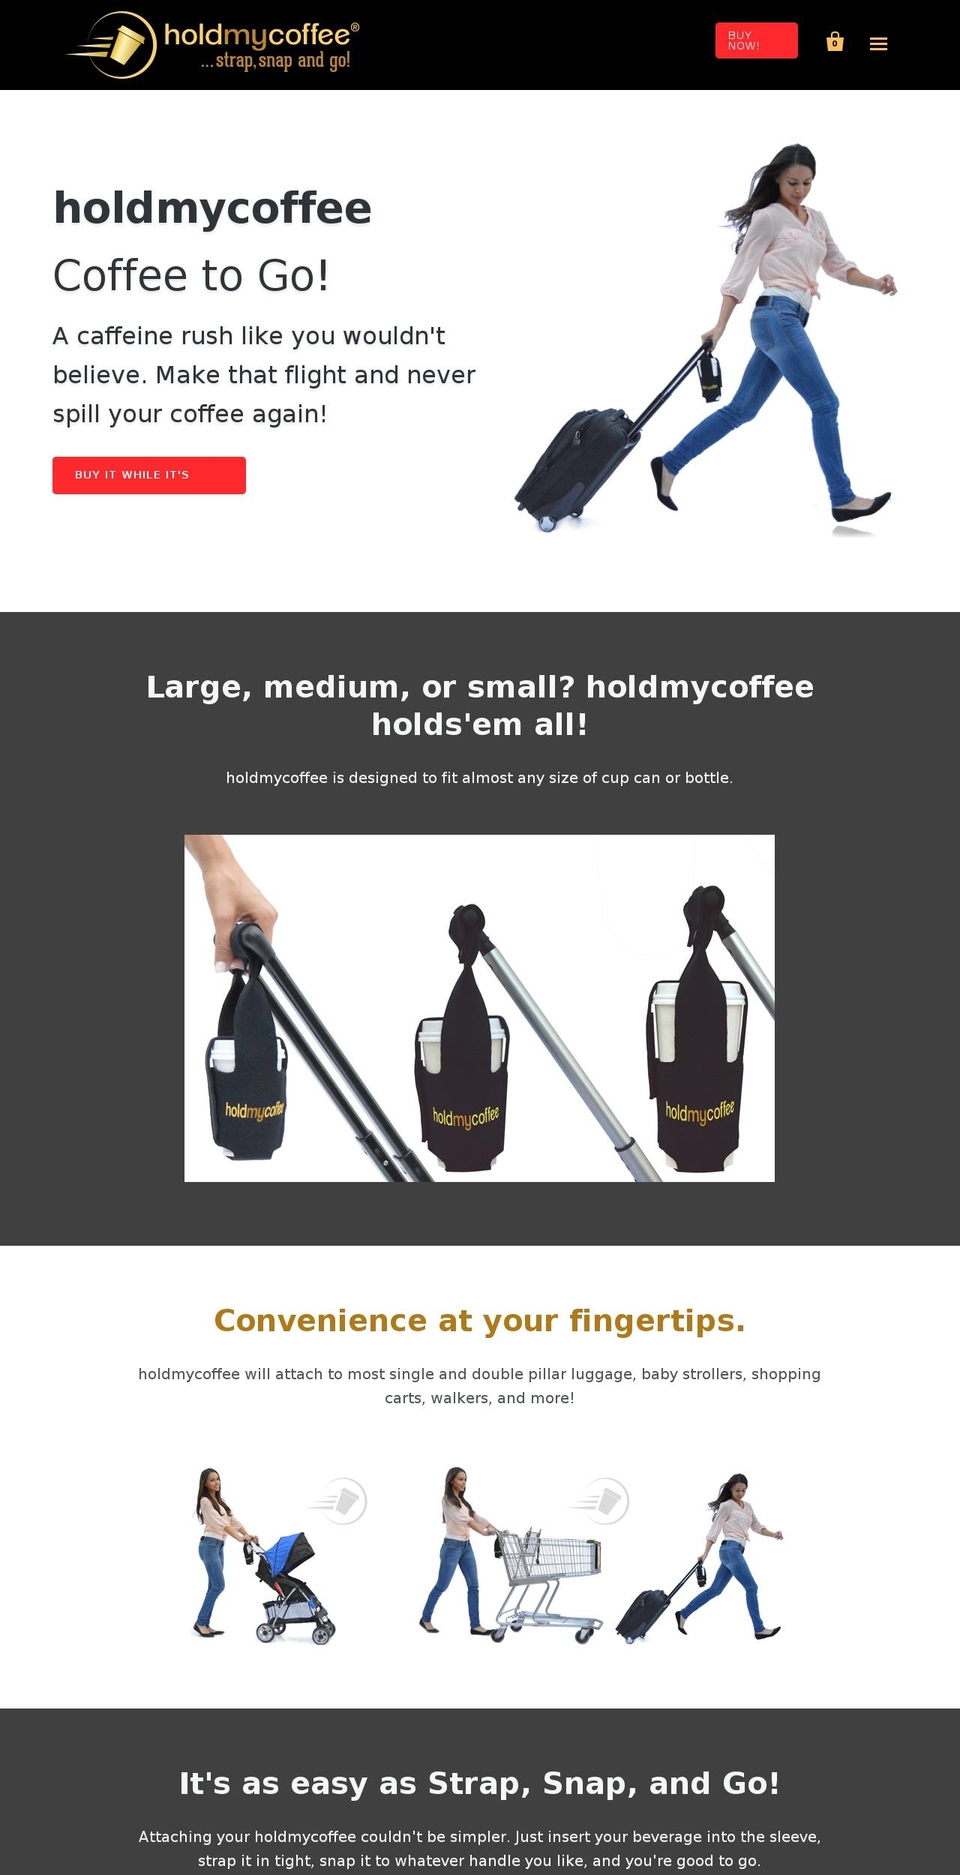 Startup Shopify theme site example holdmycoffee.com